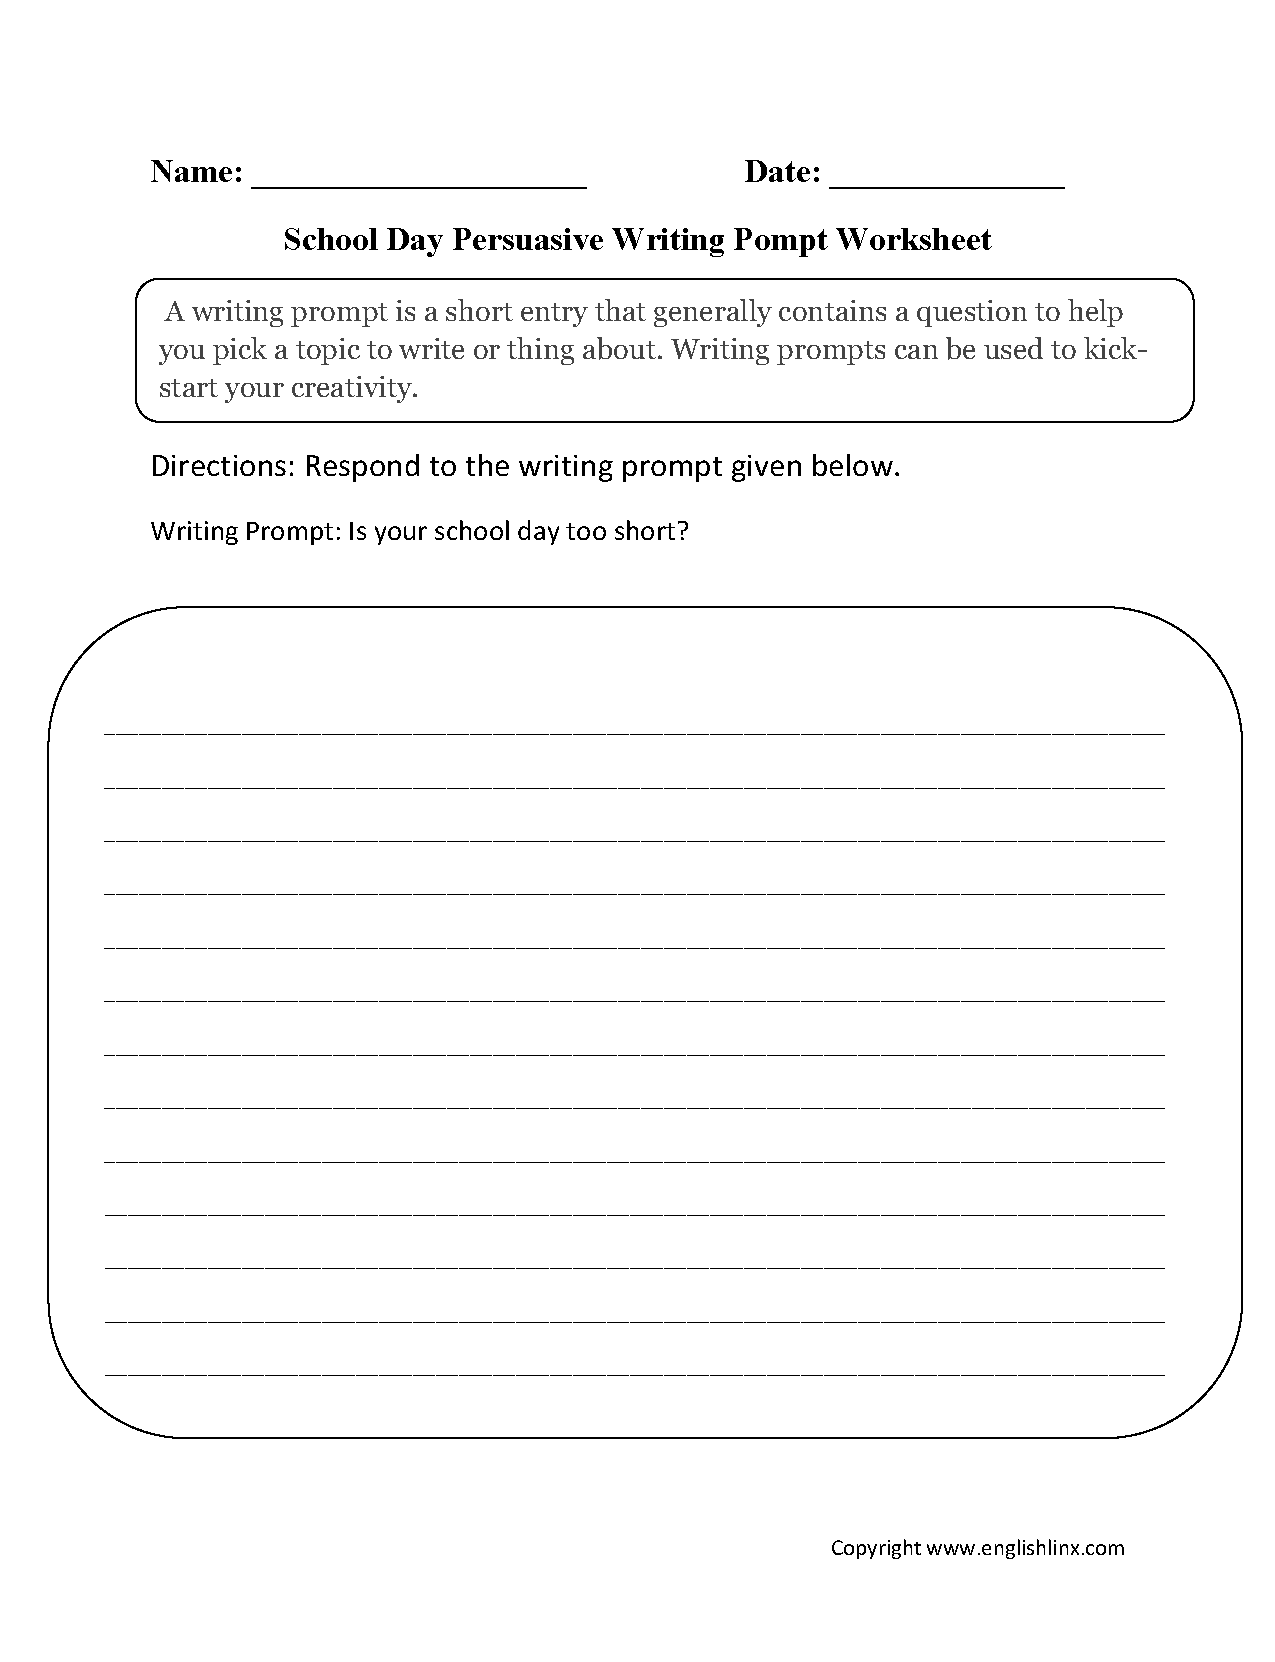 School Day Persuasive Writing Prompt Worksheets